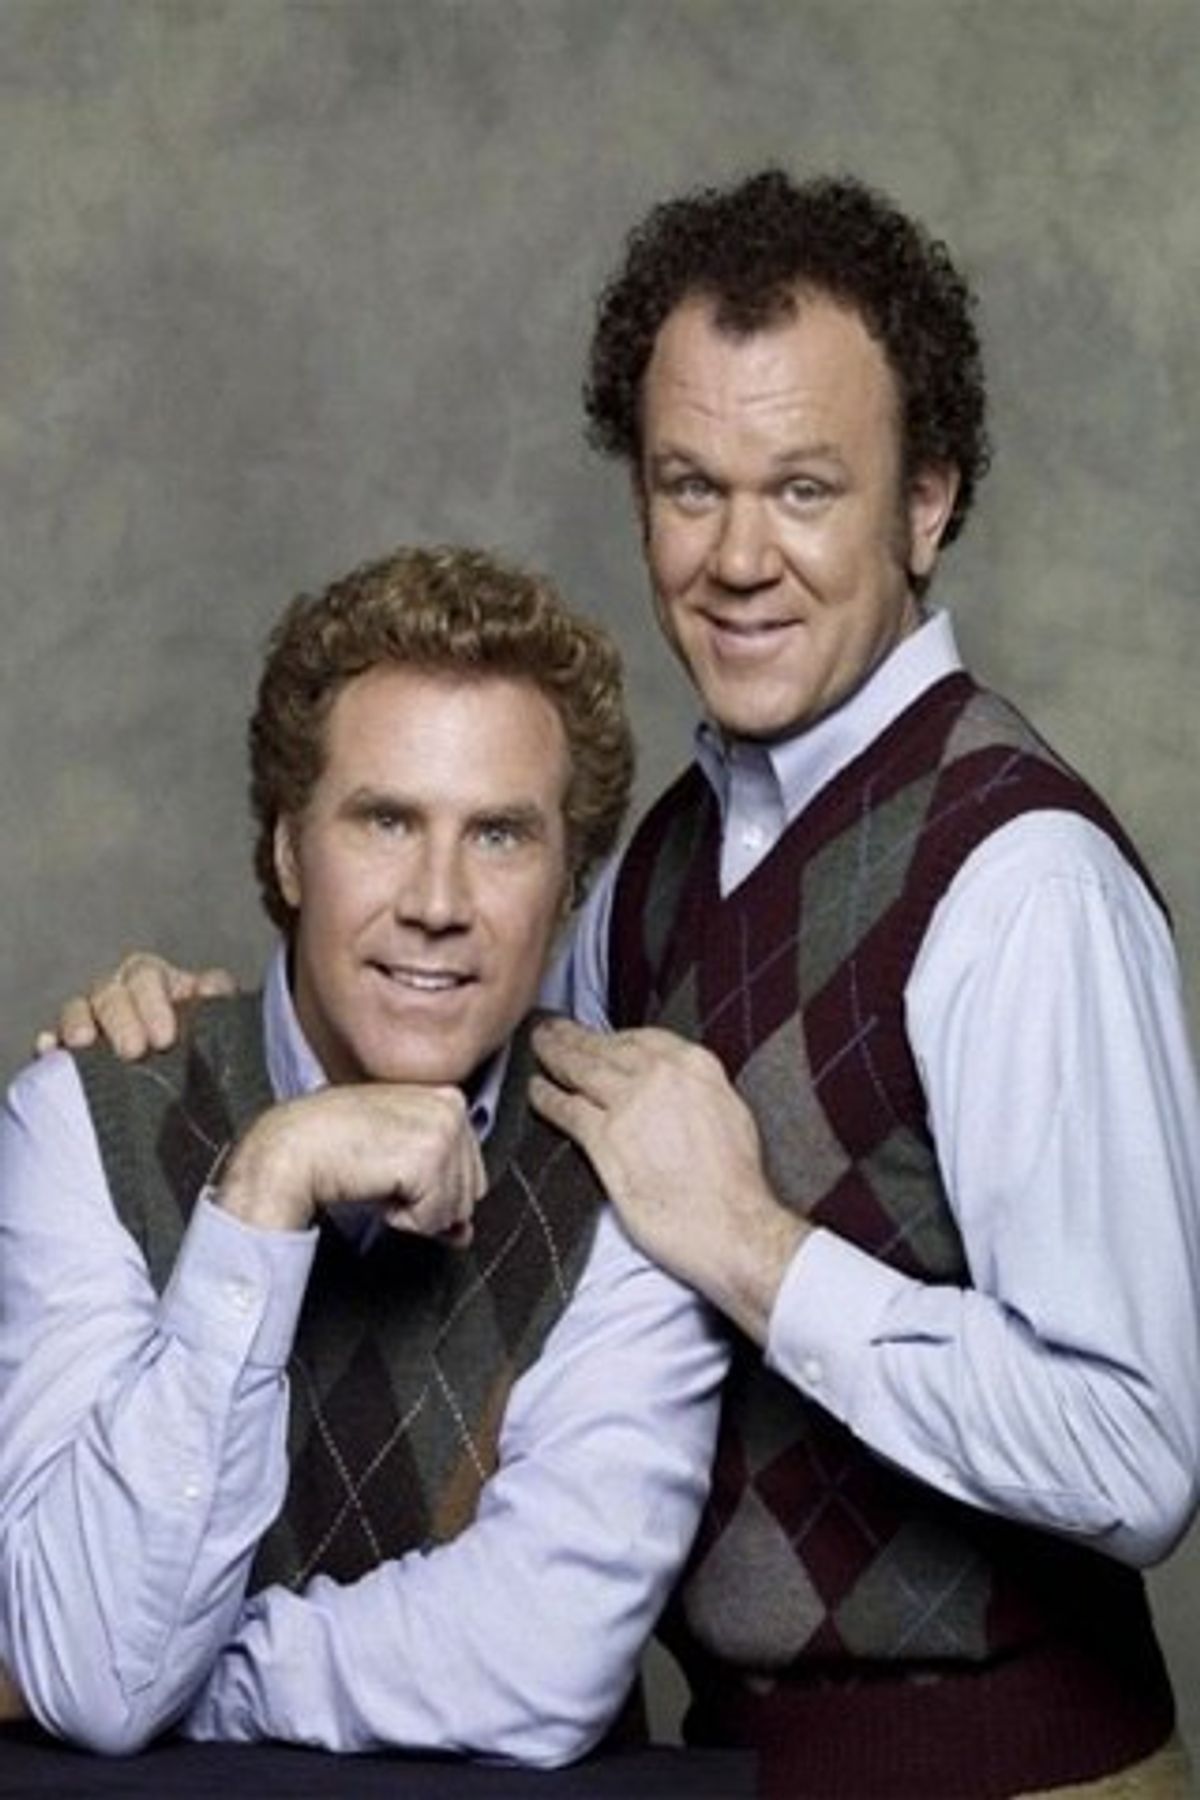 I Used To Be A Dramatic Actor, Then I Met Will Ferrell: The John C. Reilly Story